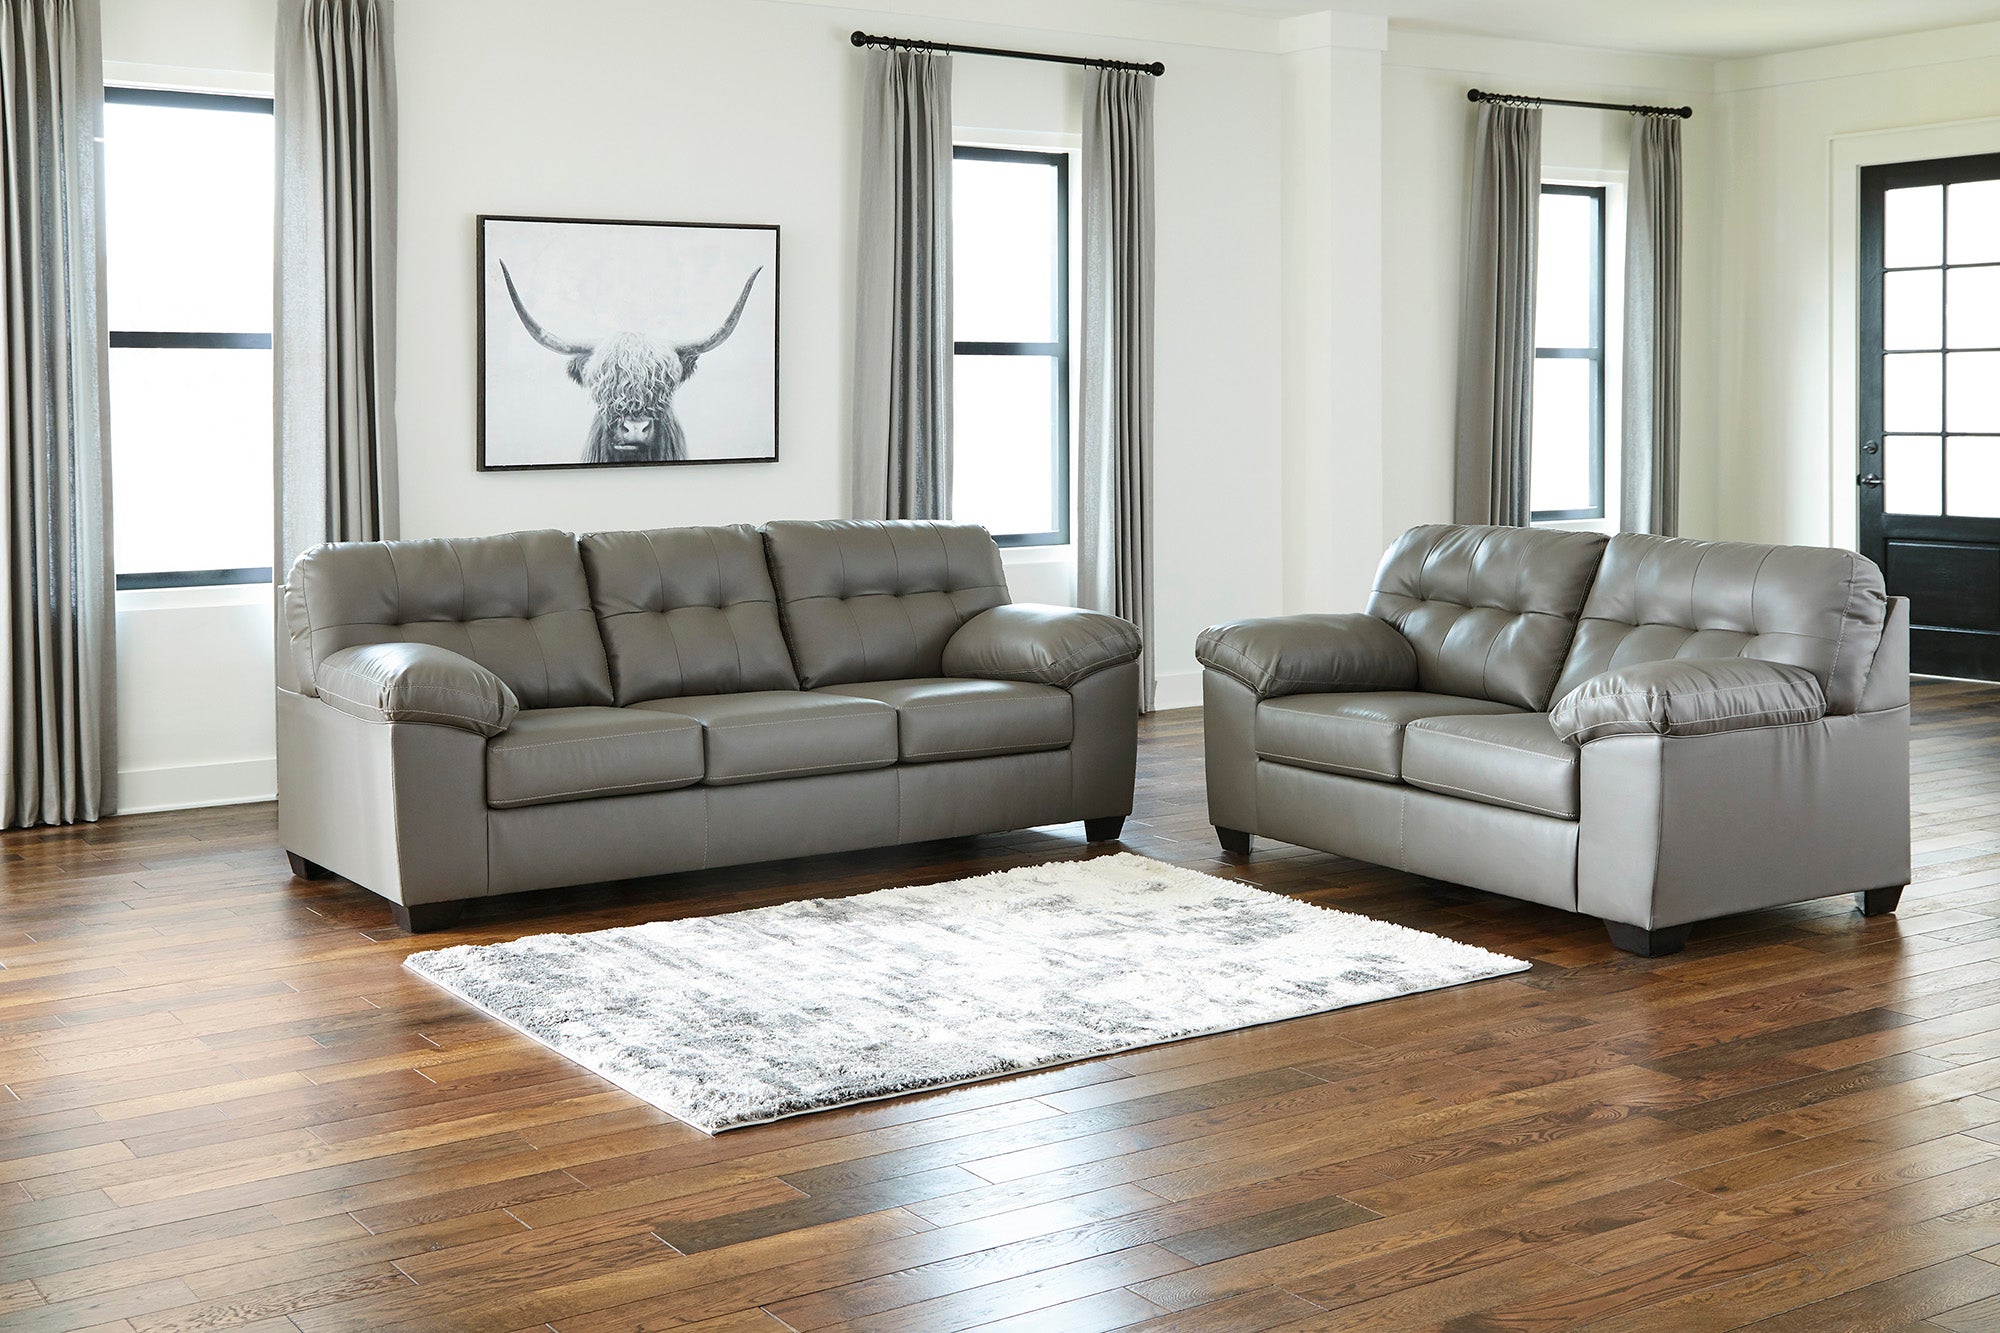 Donlen Sofa and Loveseat